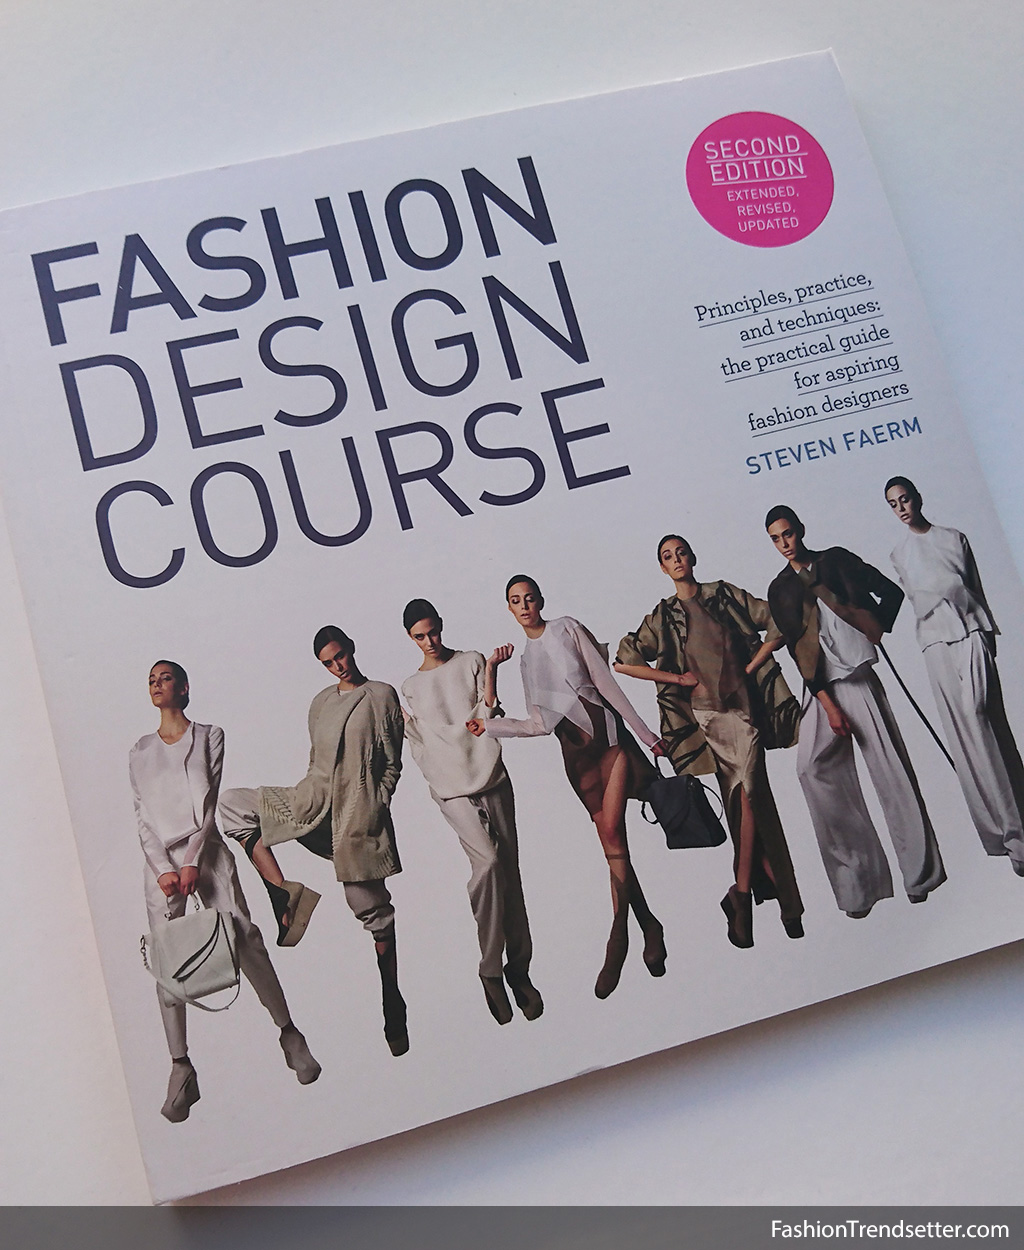 Book Review: Creating a Successful Fashion Collection by Steven Faerm